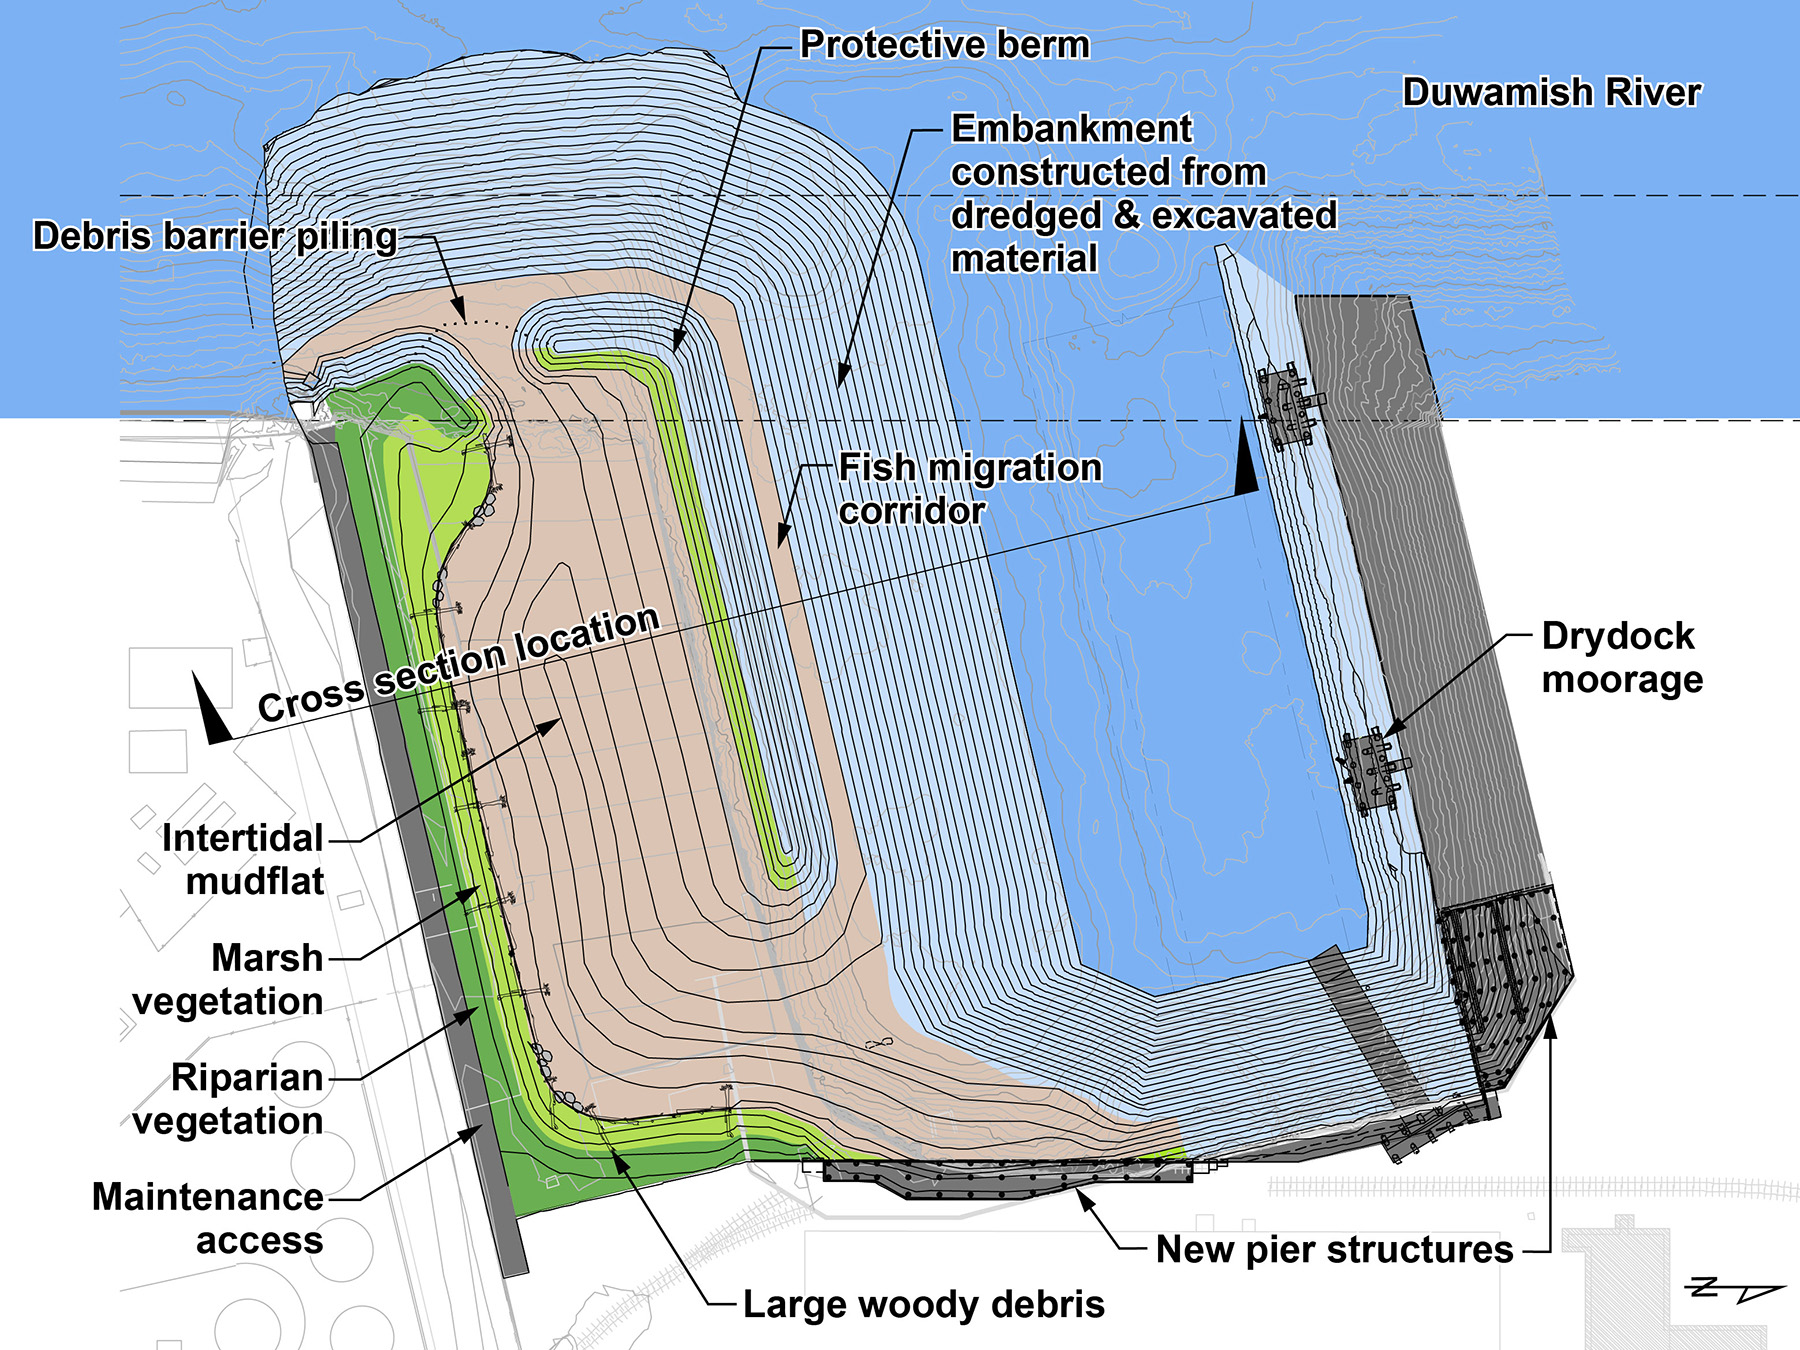 Concept plan of an aquatic habitat including intertidal mudflats, marsh and riparian vegetation, a protective berm and other features of the site. 